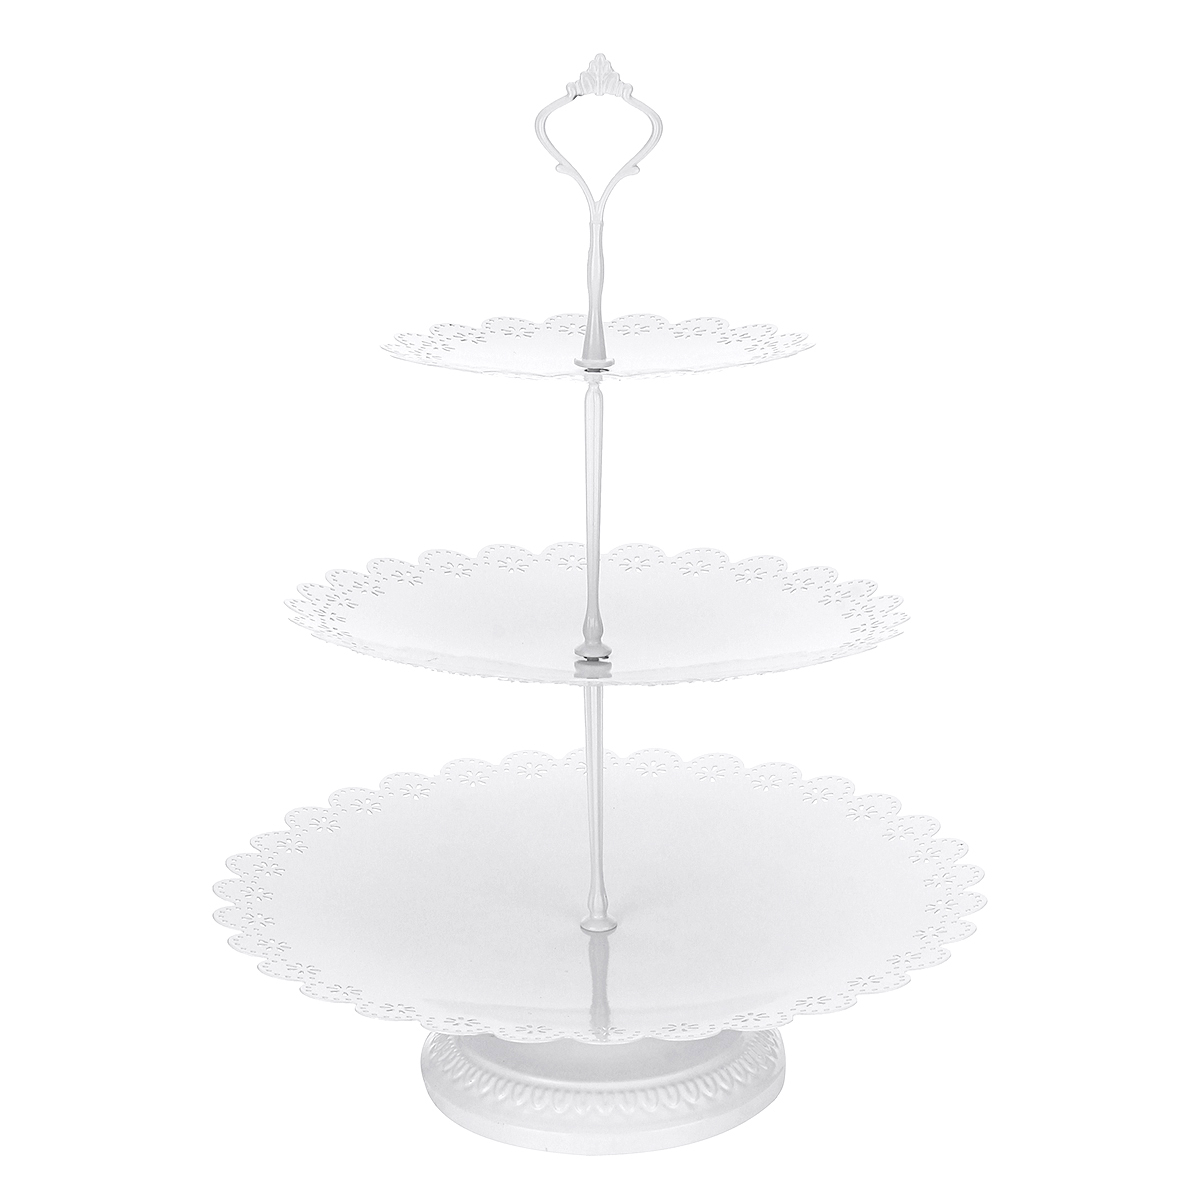 Find Wedding Cake Stand Crystal Decor Supplies Metal Cupcake Holder Crystal Plates Set for Sale on Gipsybee.com with cryptocurrencies